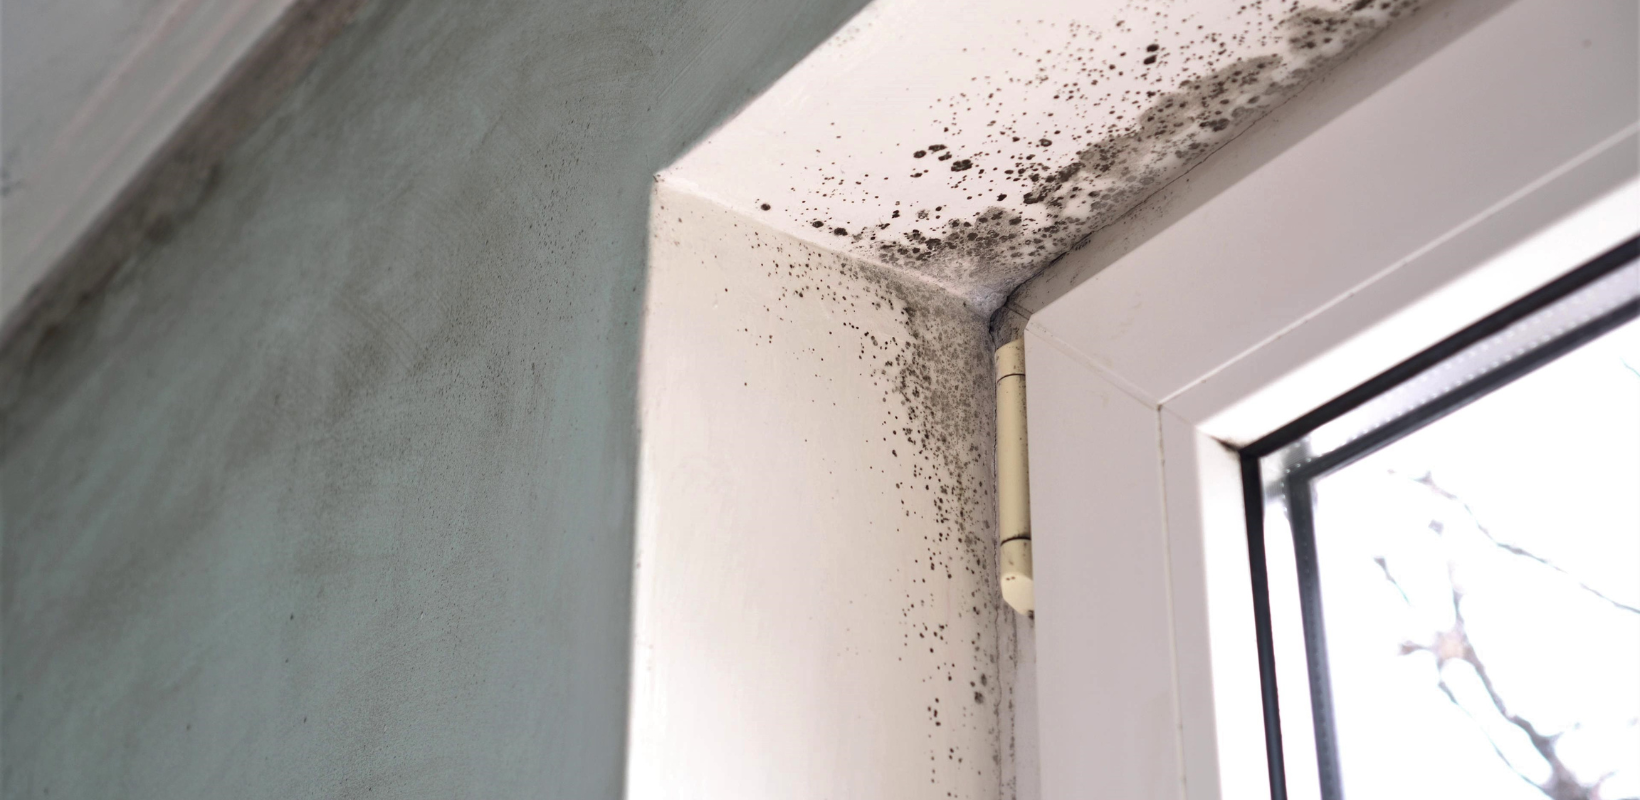 How to Remove Mold from the Caulk Around the Kitchen Sink